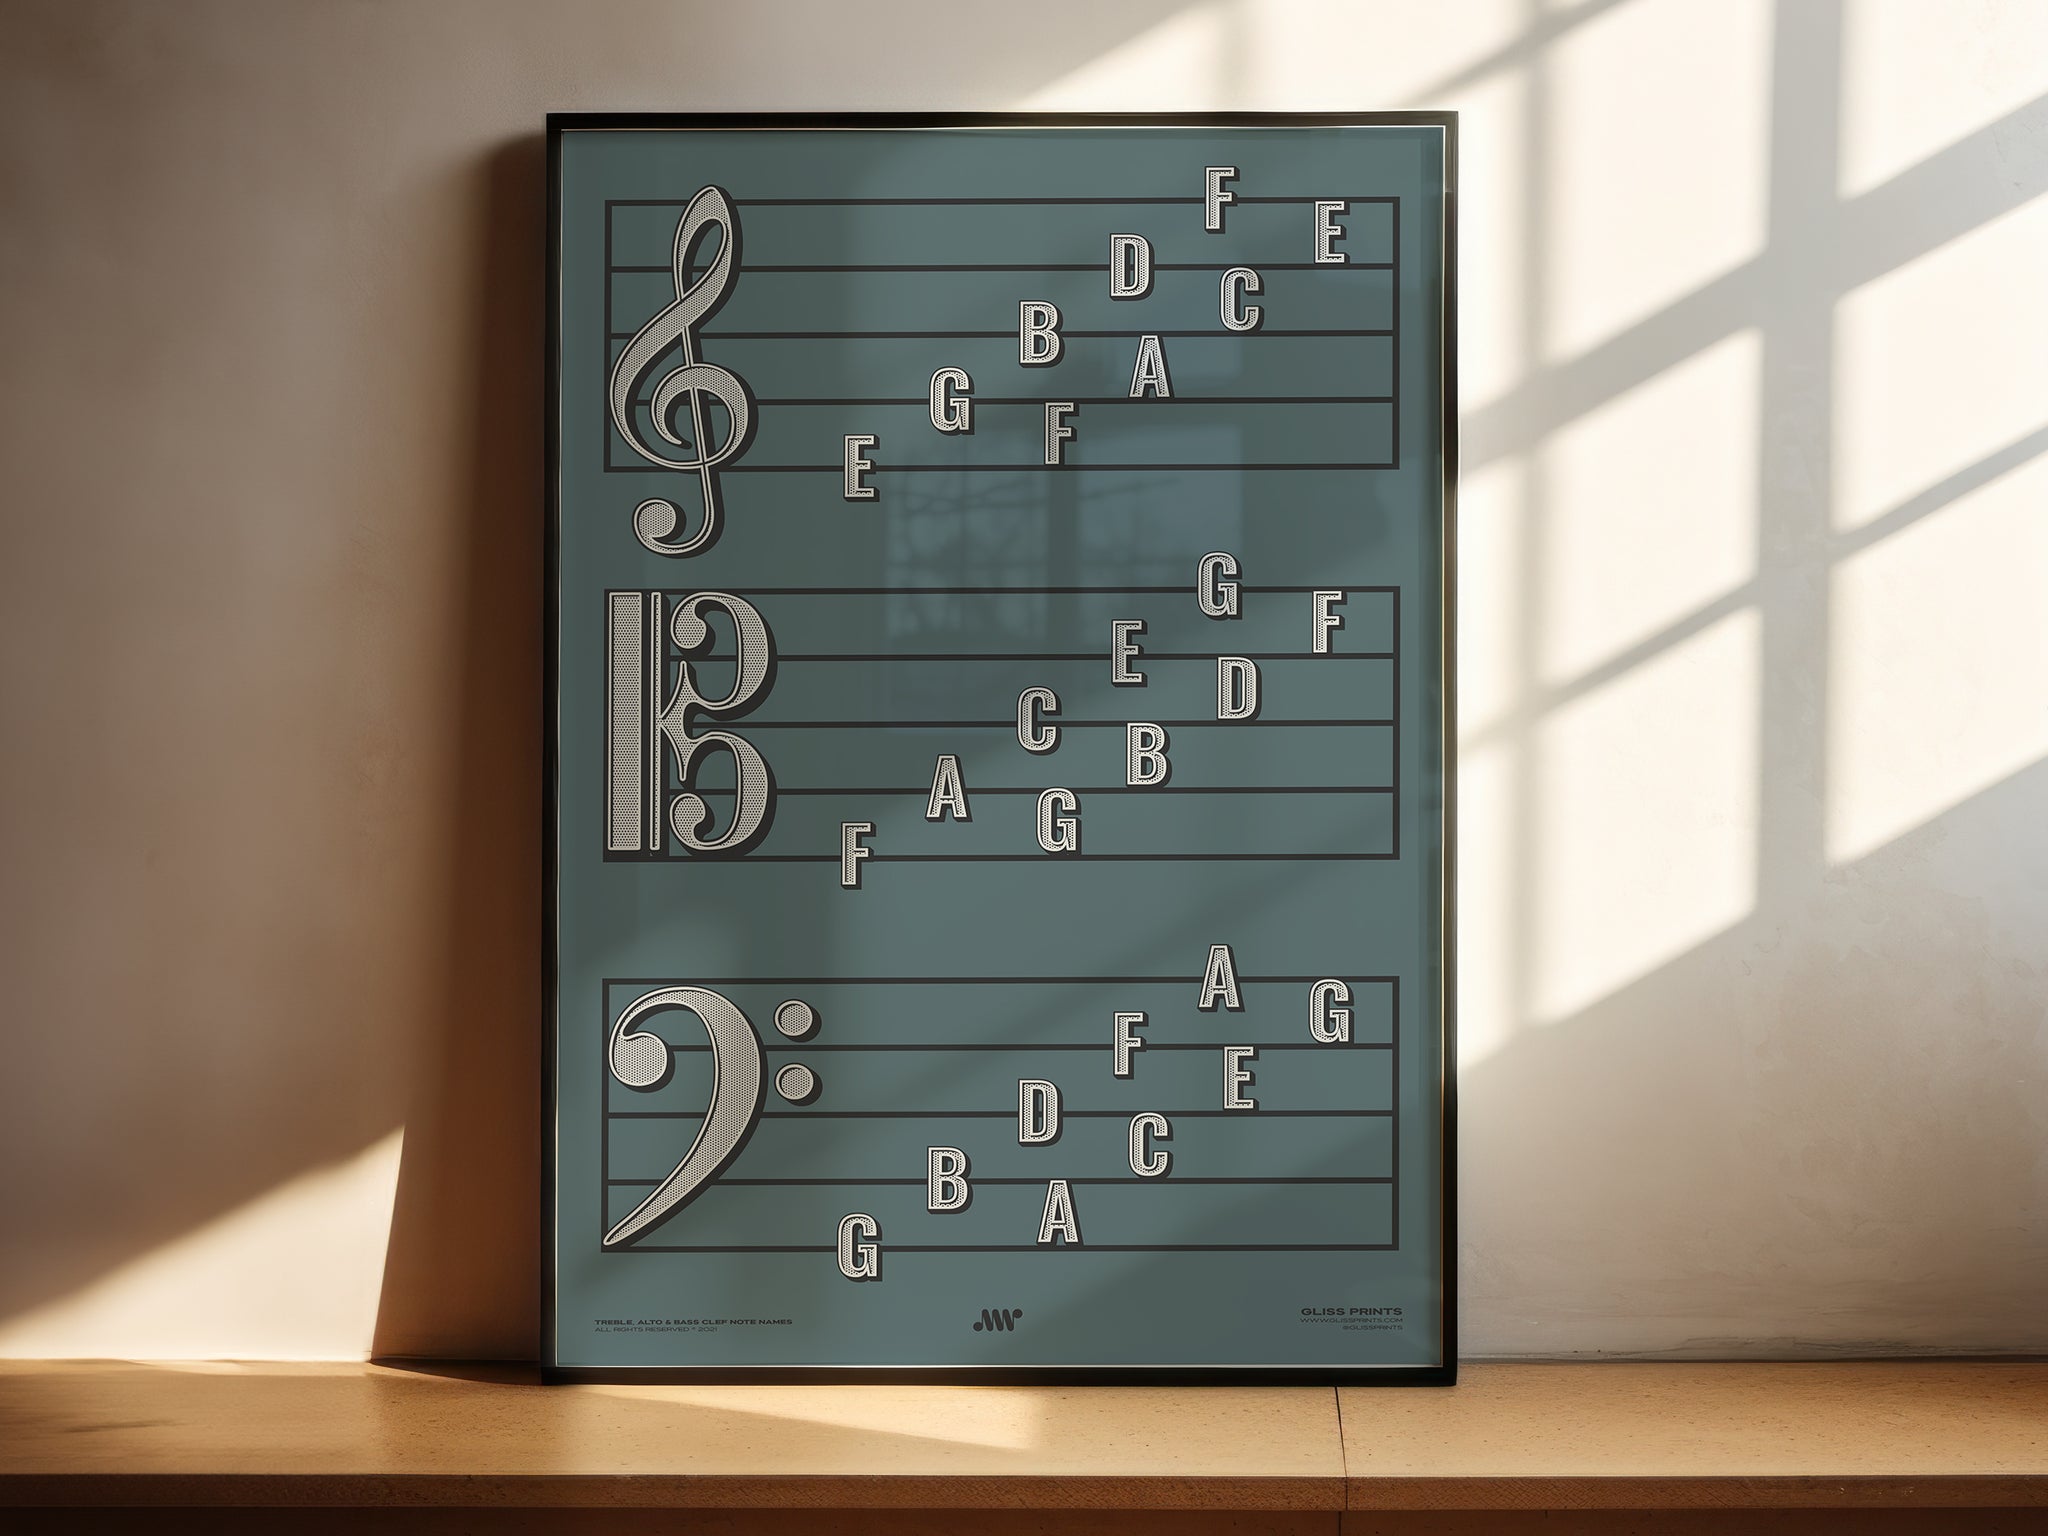 Treble Clef, Alto Clef, Bass Clef Note Names Poster, Blue